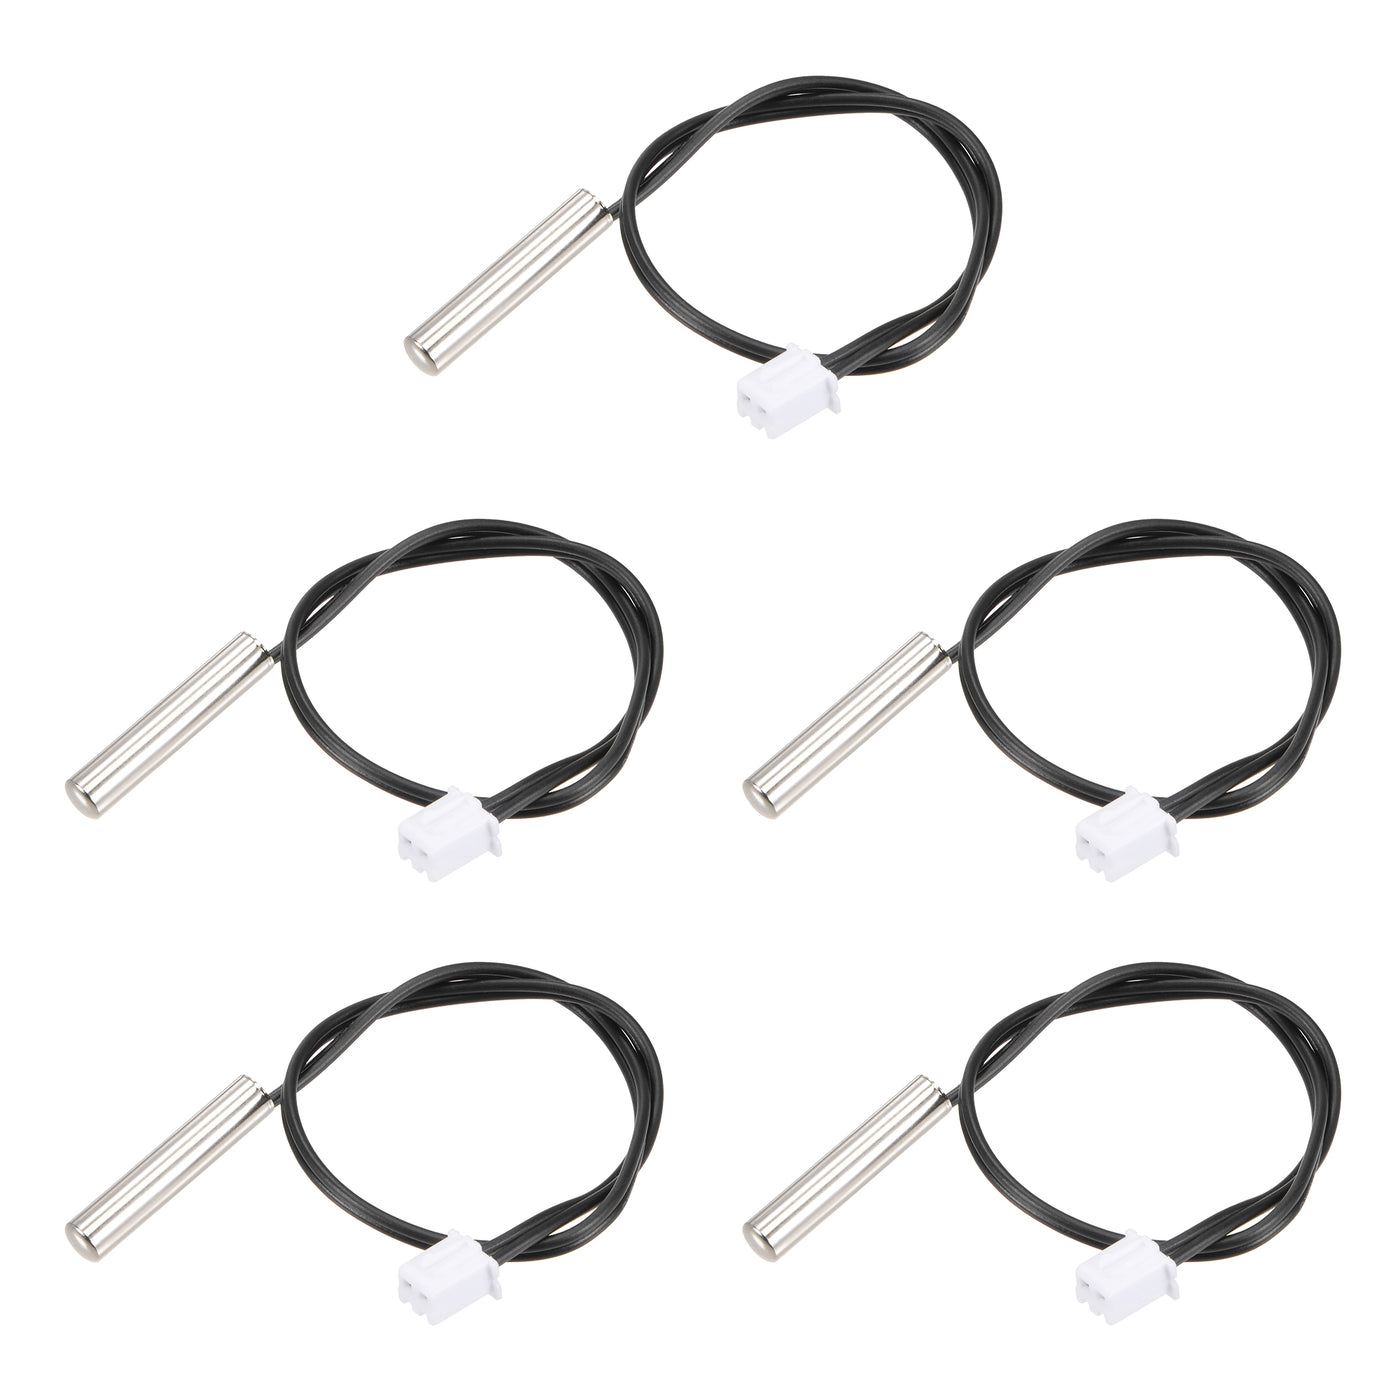 uxcell Uxcell 5pcs 50K Temperature Sensor Probe, Stainless Steel NTC Thermal Sensor Probe 20cm Digital Thermometer Extension Cable